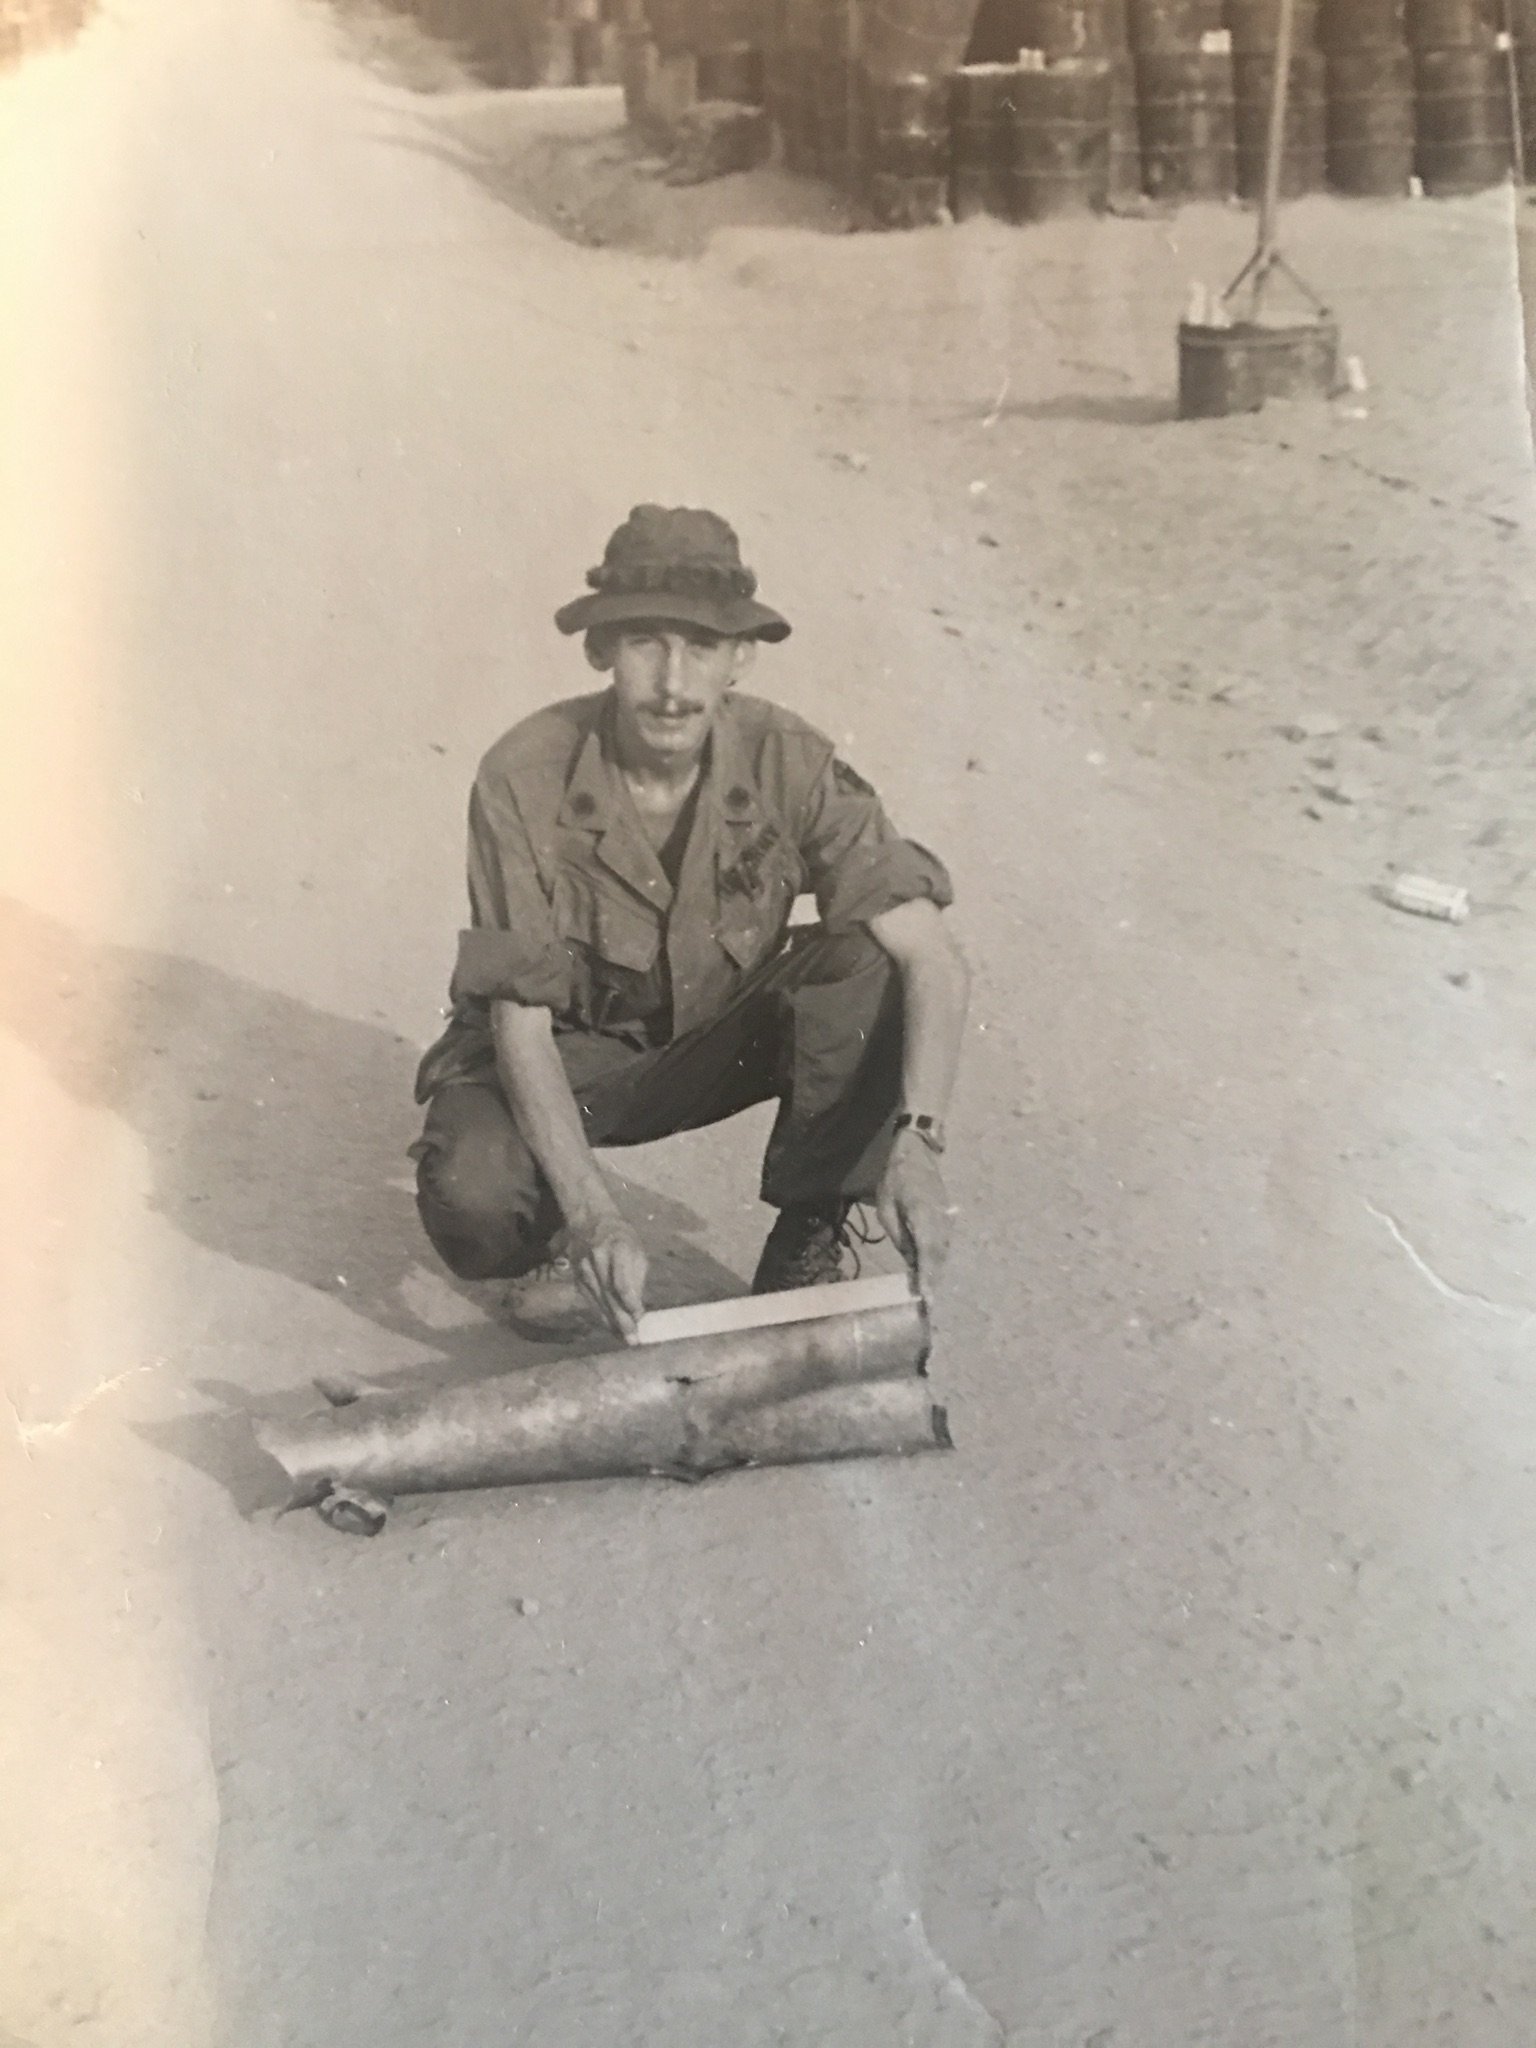 US soldier in a boonie hat knelt down next to an exploded rocket.